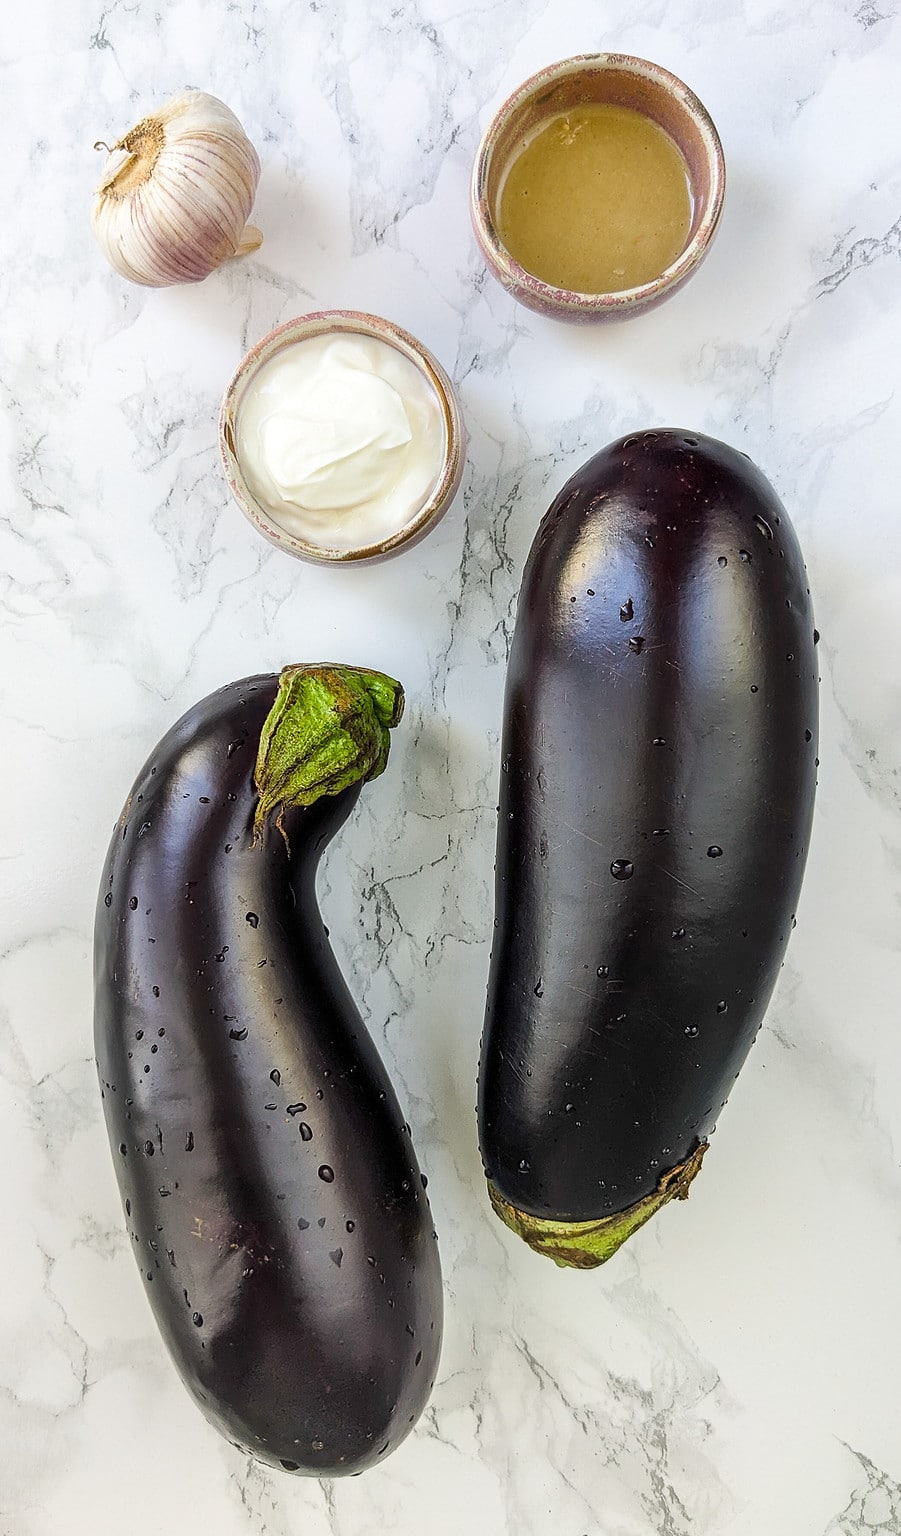 4 Ingredient Eggplant and Roasted Garlic Dip - Go Cook Yummy